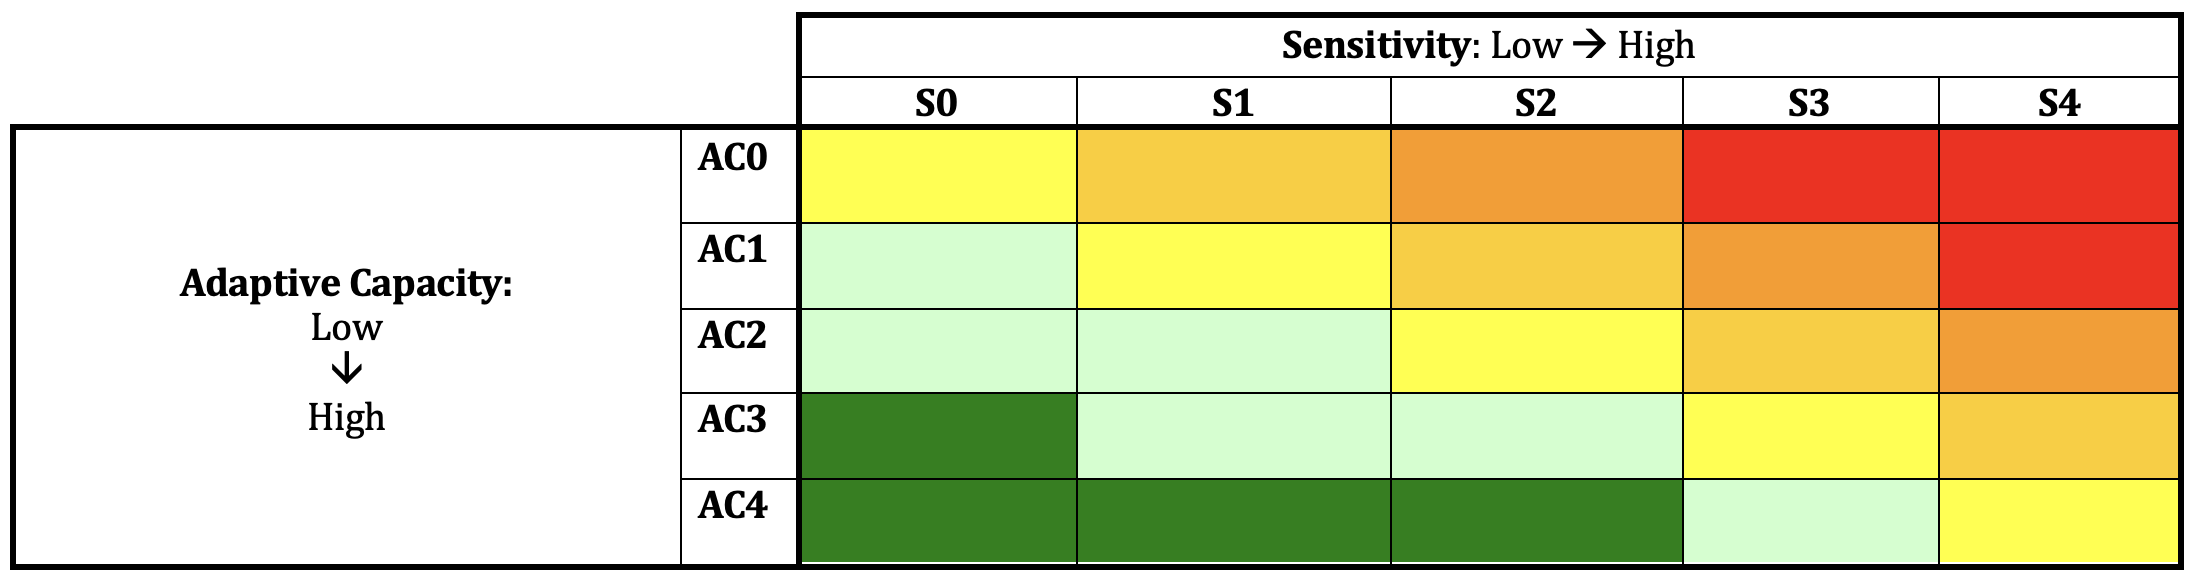 The figures is a 5 by 5 vulnerability assessment matrix with graduated colors from dark green in the bottom left corner to bright red in the top right. Adaptive Capacity is displayed in the vertical range from ranges from  Low "AC0" on top to High "AC4" on the bottom. Sensitivity is shown from Low "S0" on the left to High "S4" on the right. is shown 